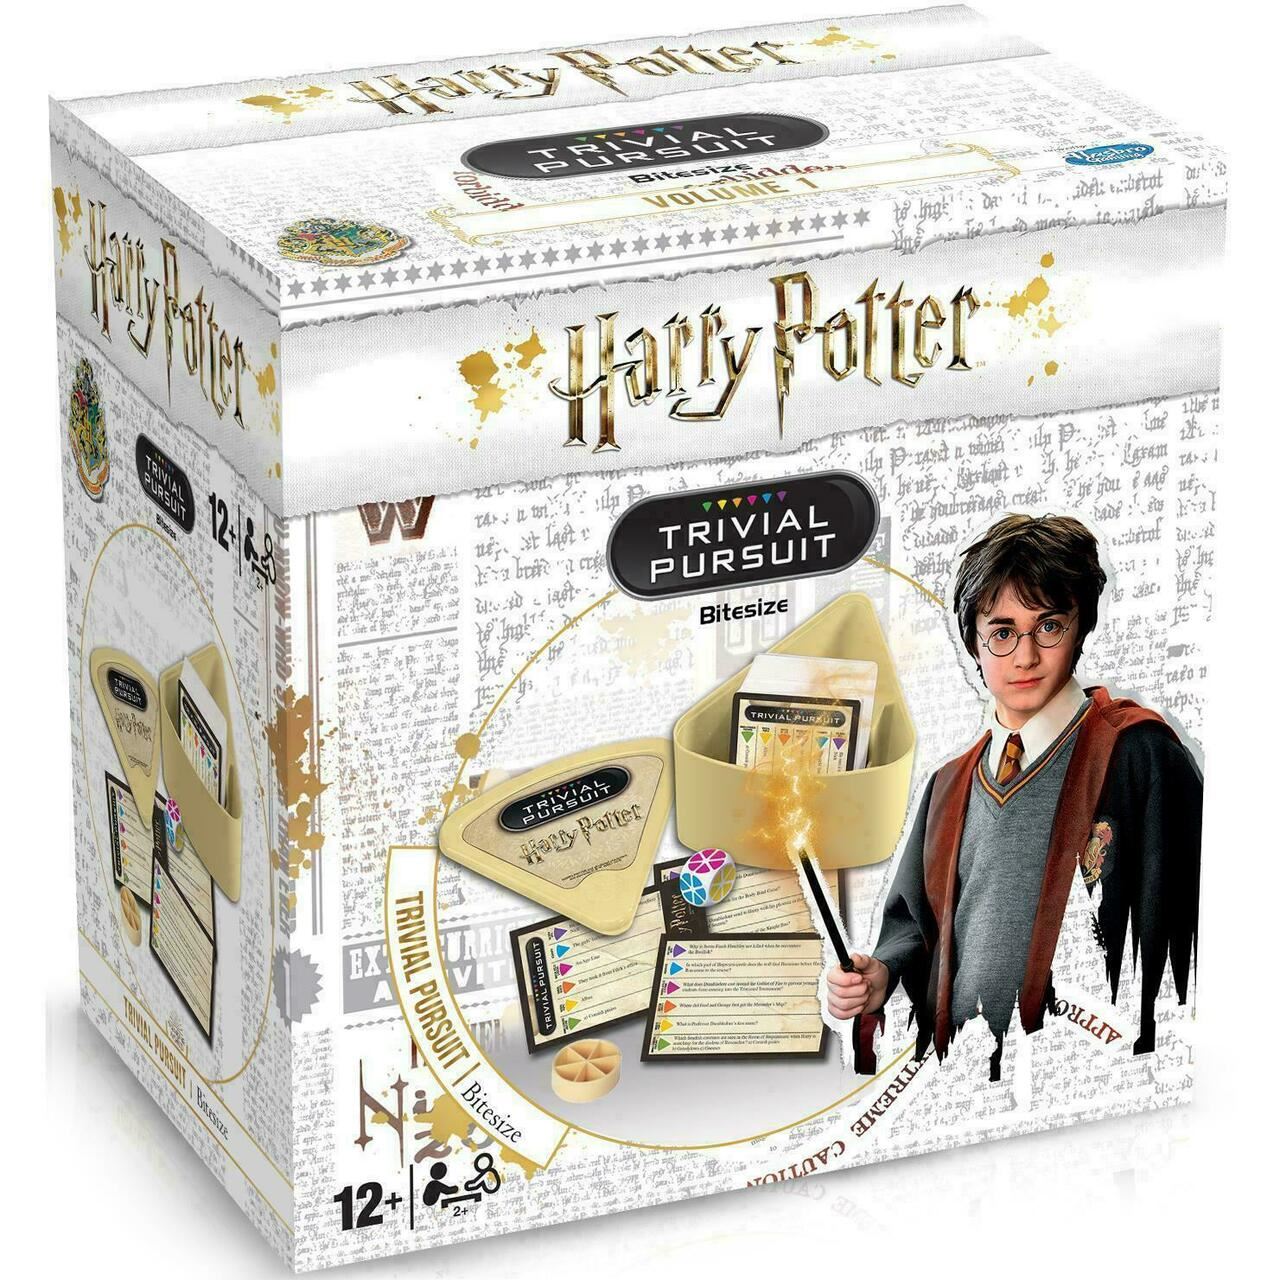 Harry Potter Trivial Pursuit Bite Size Board Game - image 1 of 3